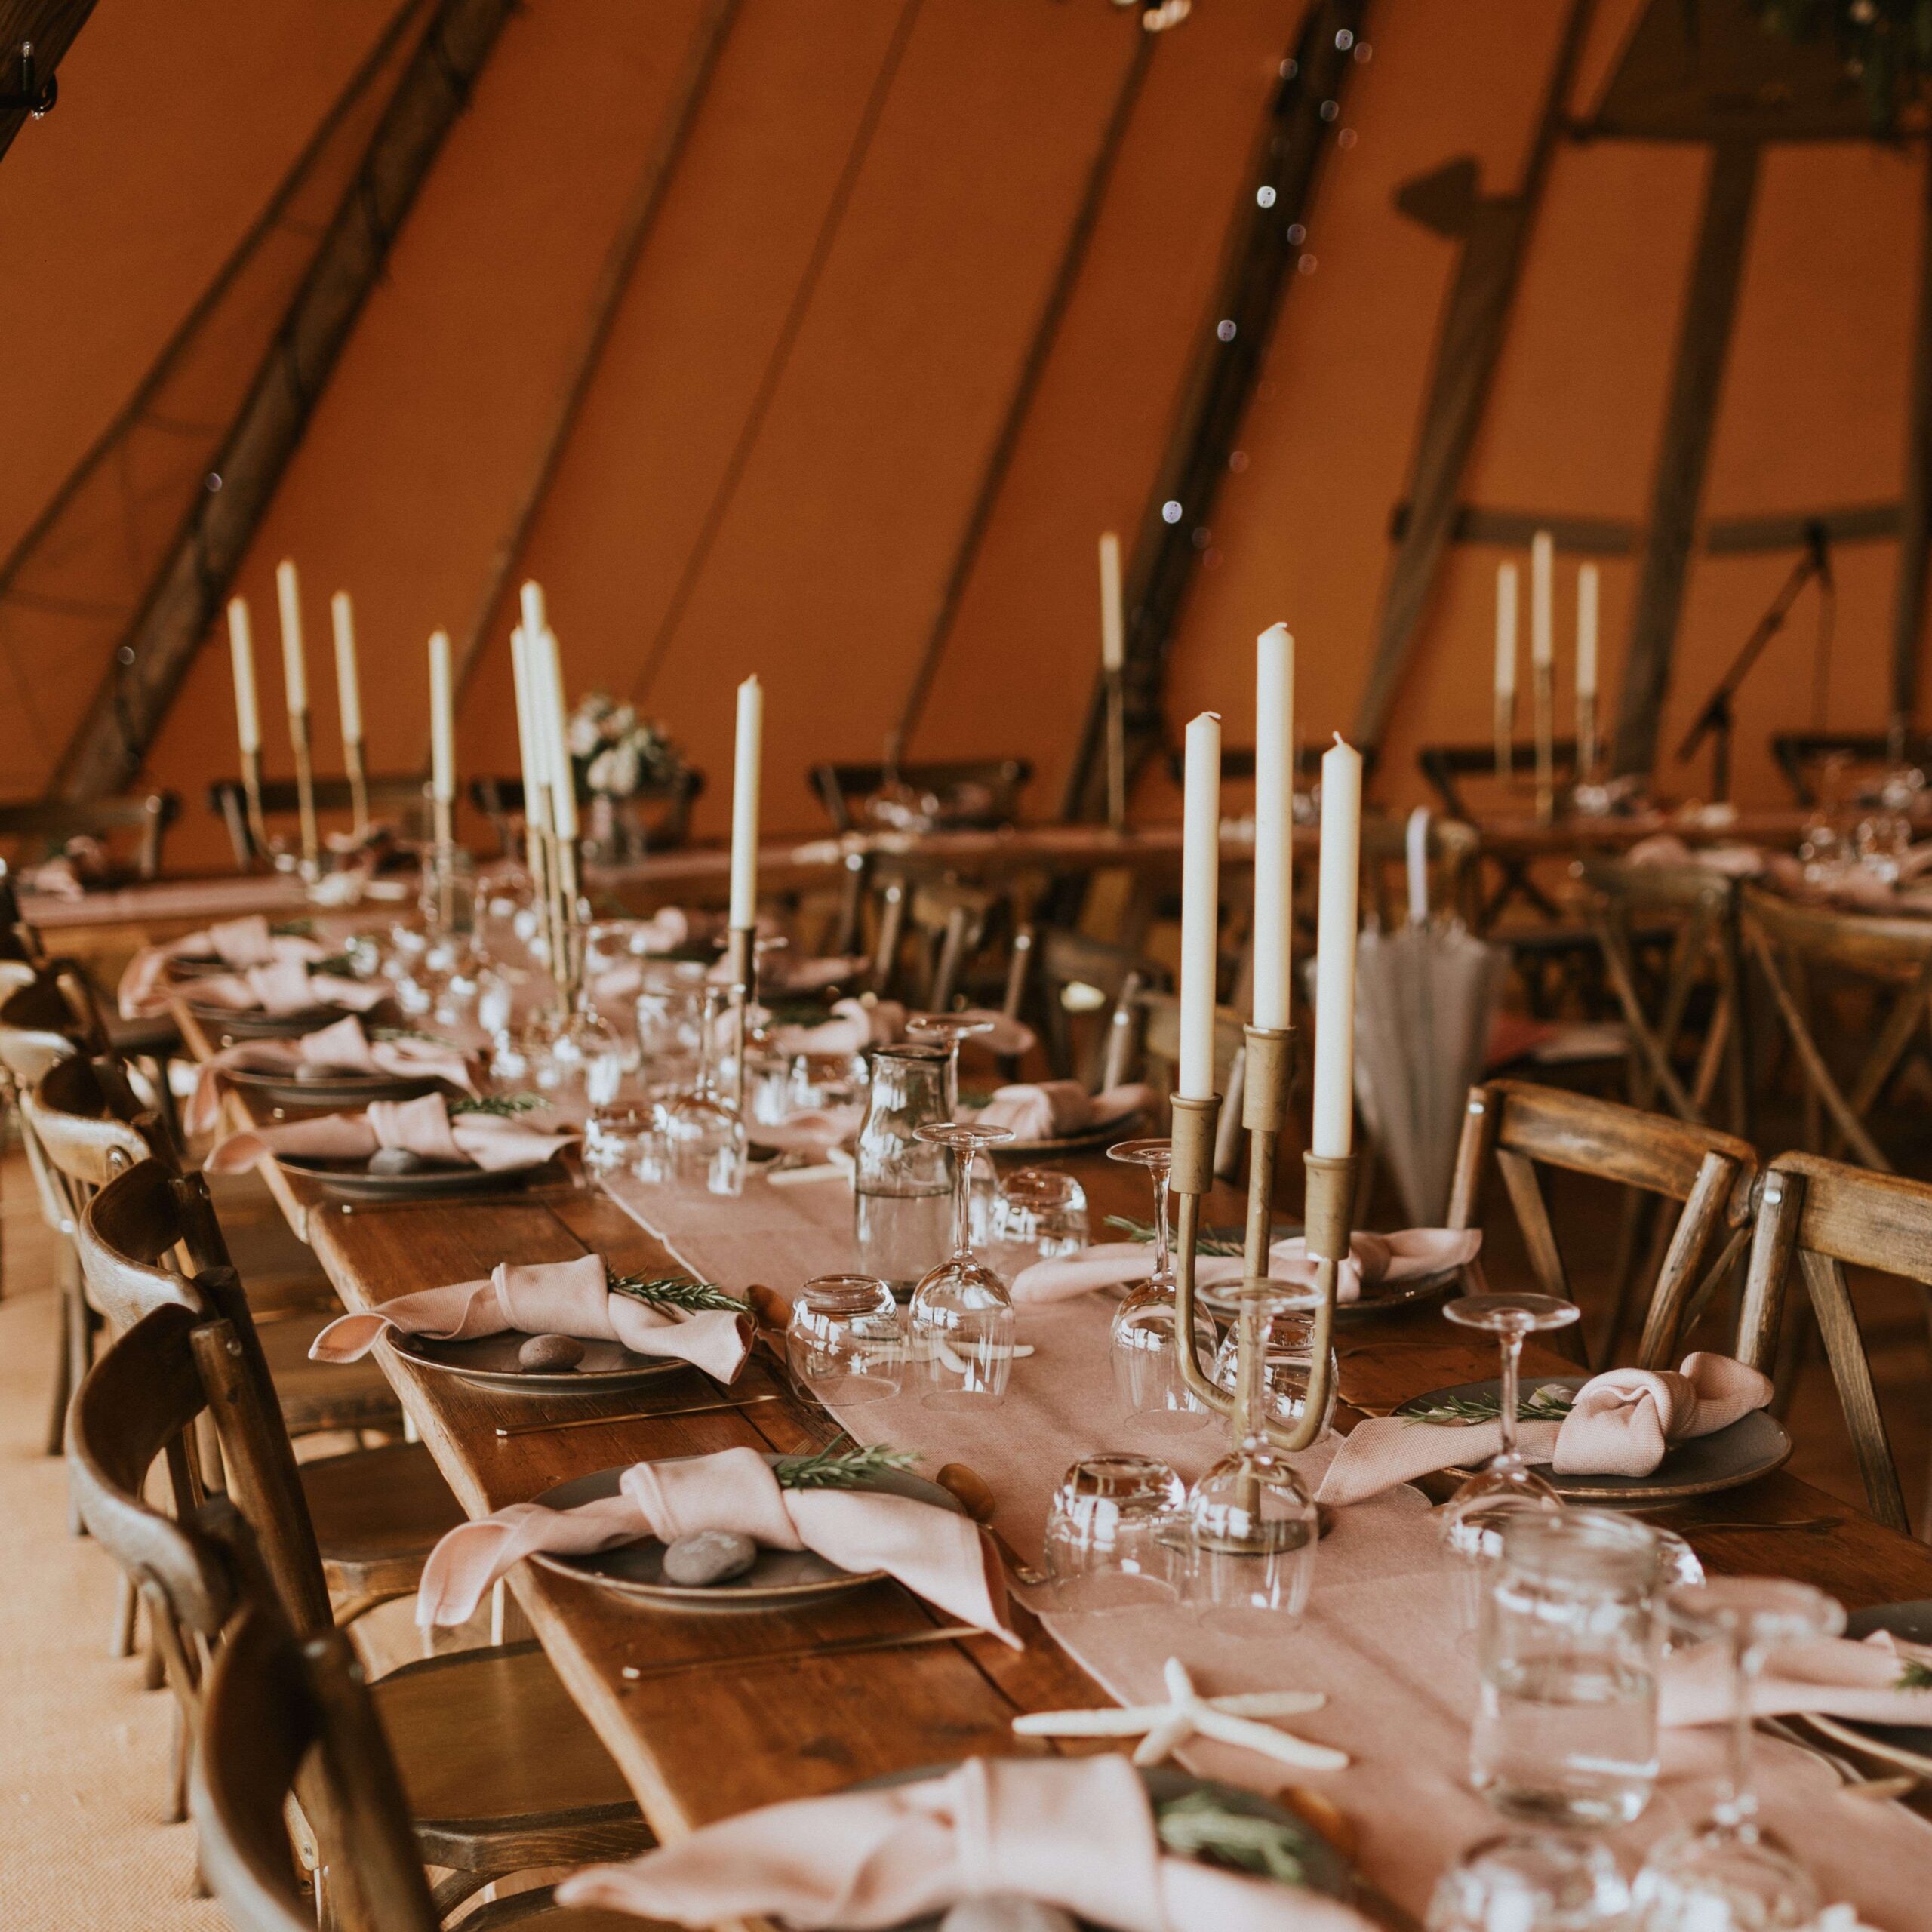 Brass candelabra on wooden wedding table place setting in orange tent